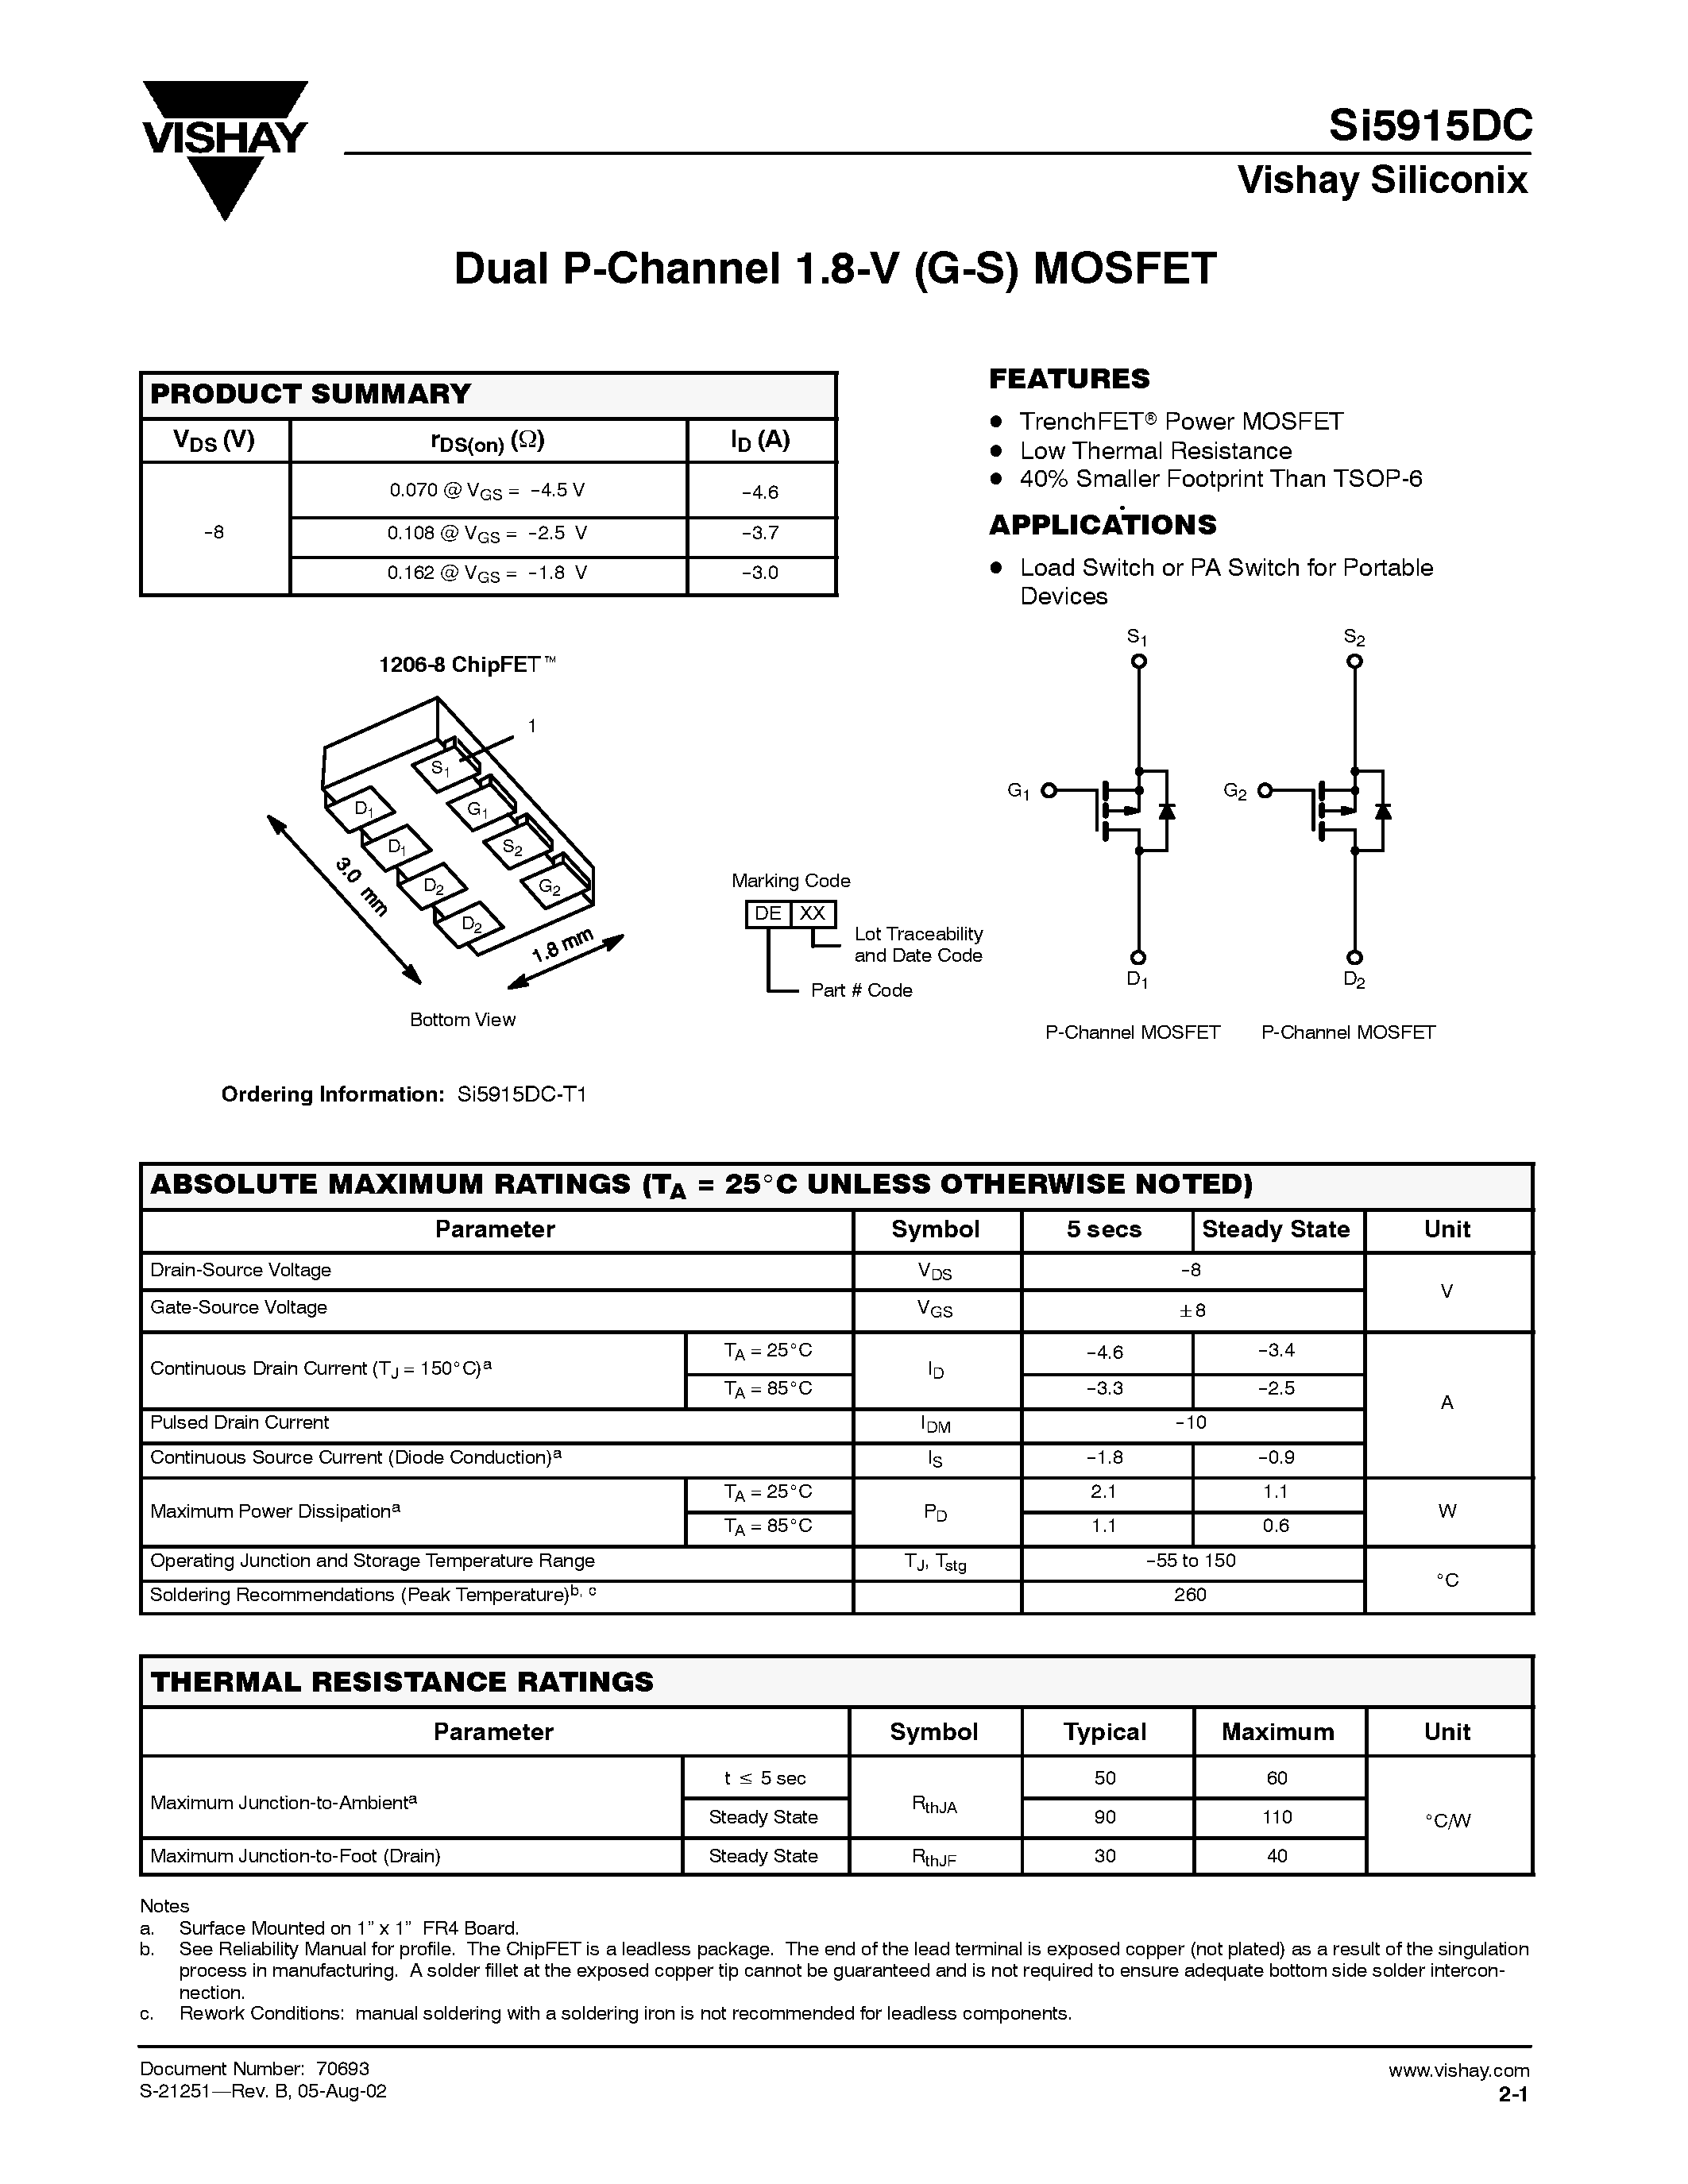 Даташит SI5915DC - Dual P-Channel 1.8-V (G-S) MOSFET страница 1